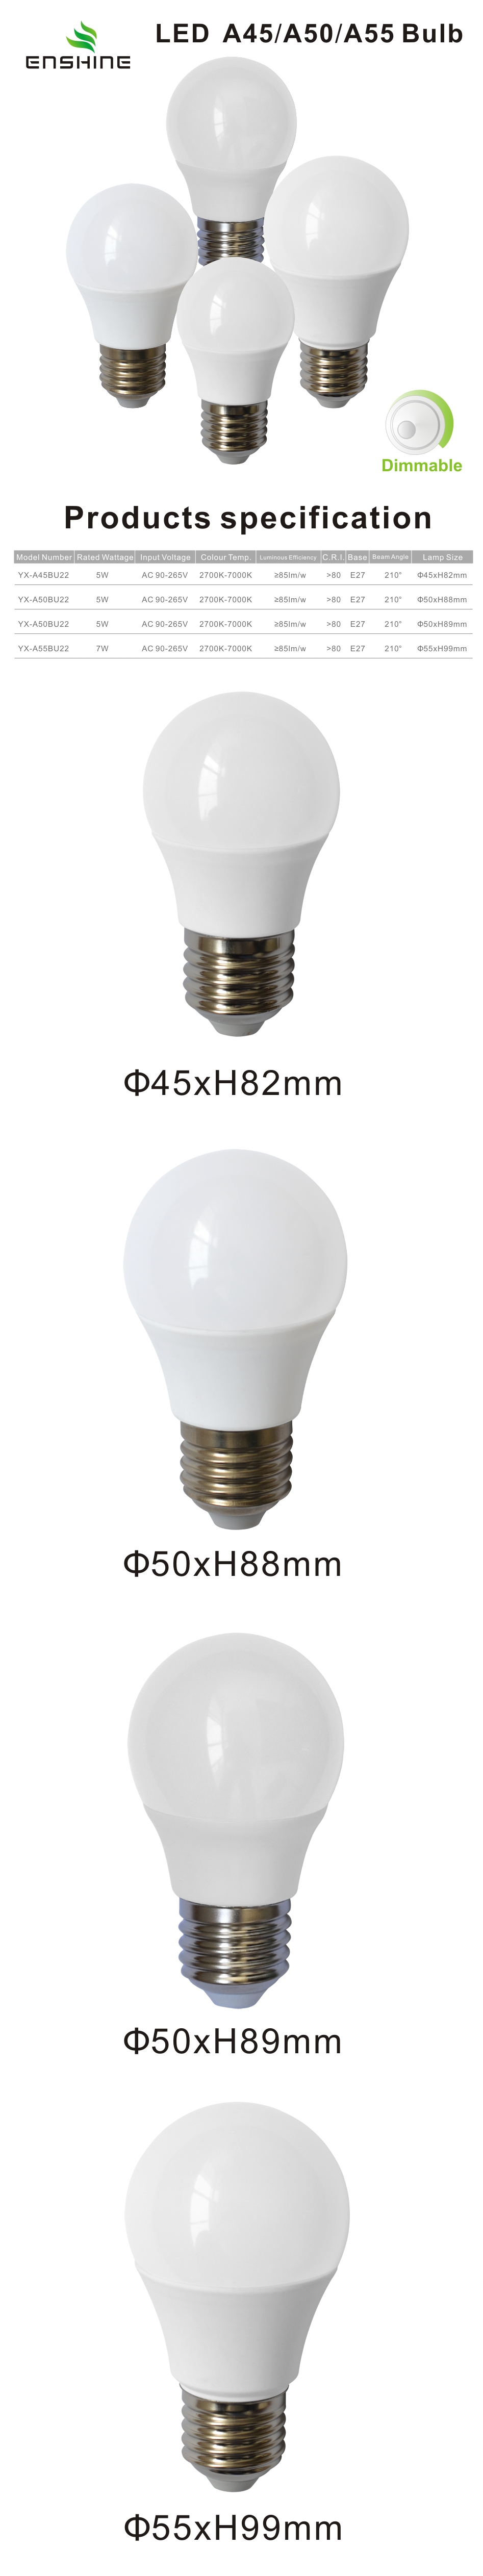 5W A50 LED Dimmable Bulb